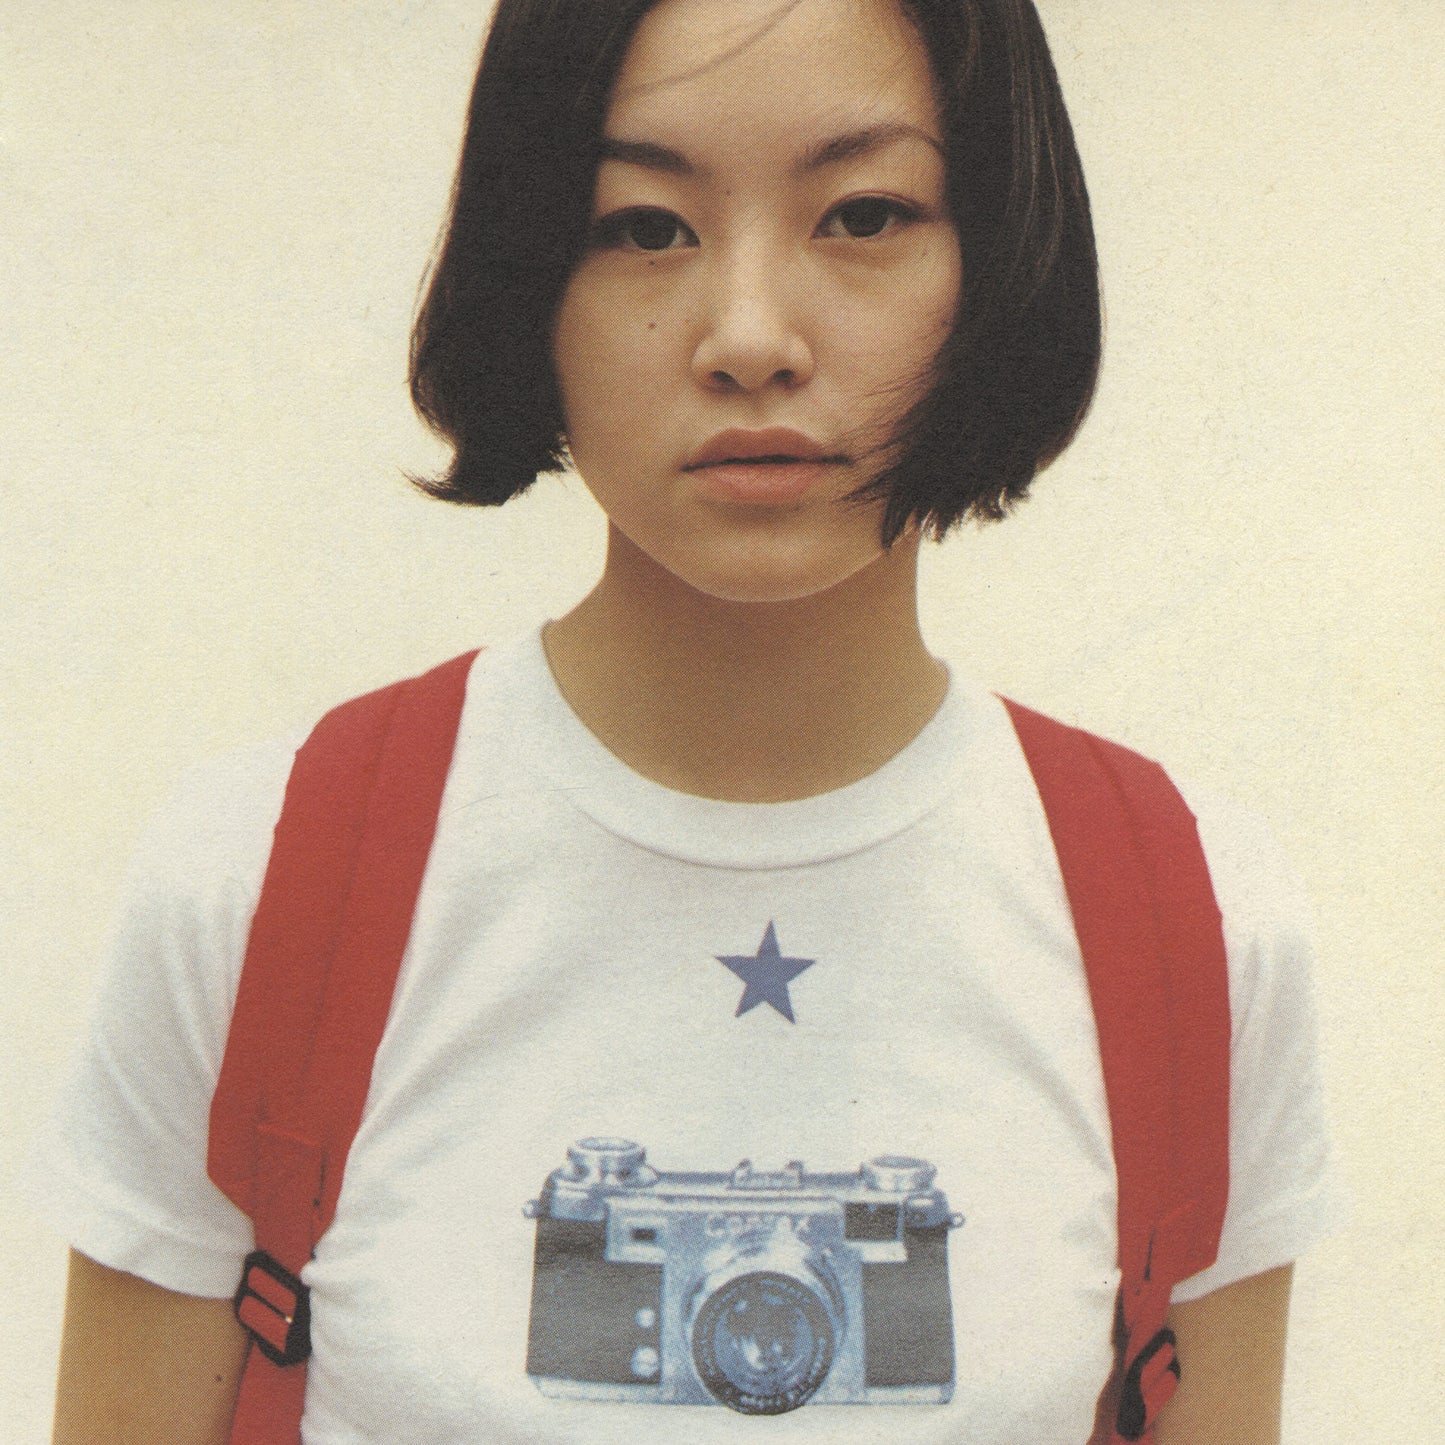 Girls in the New Jap Photography